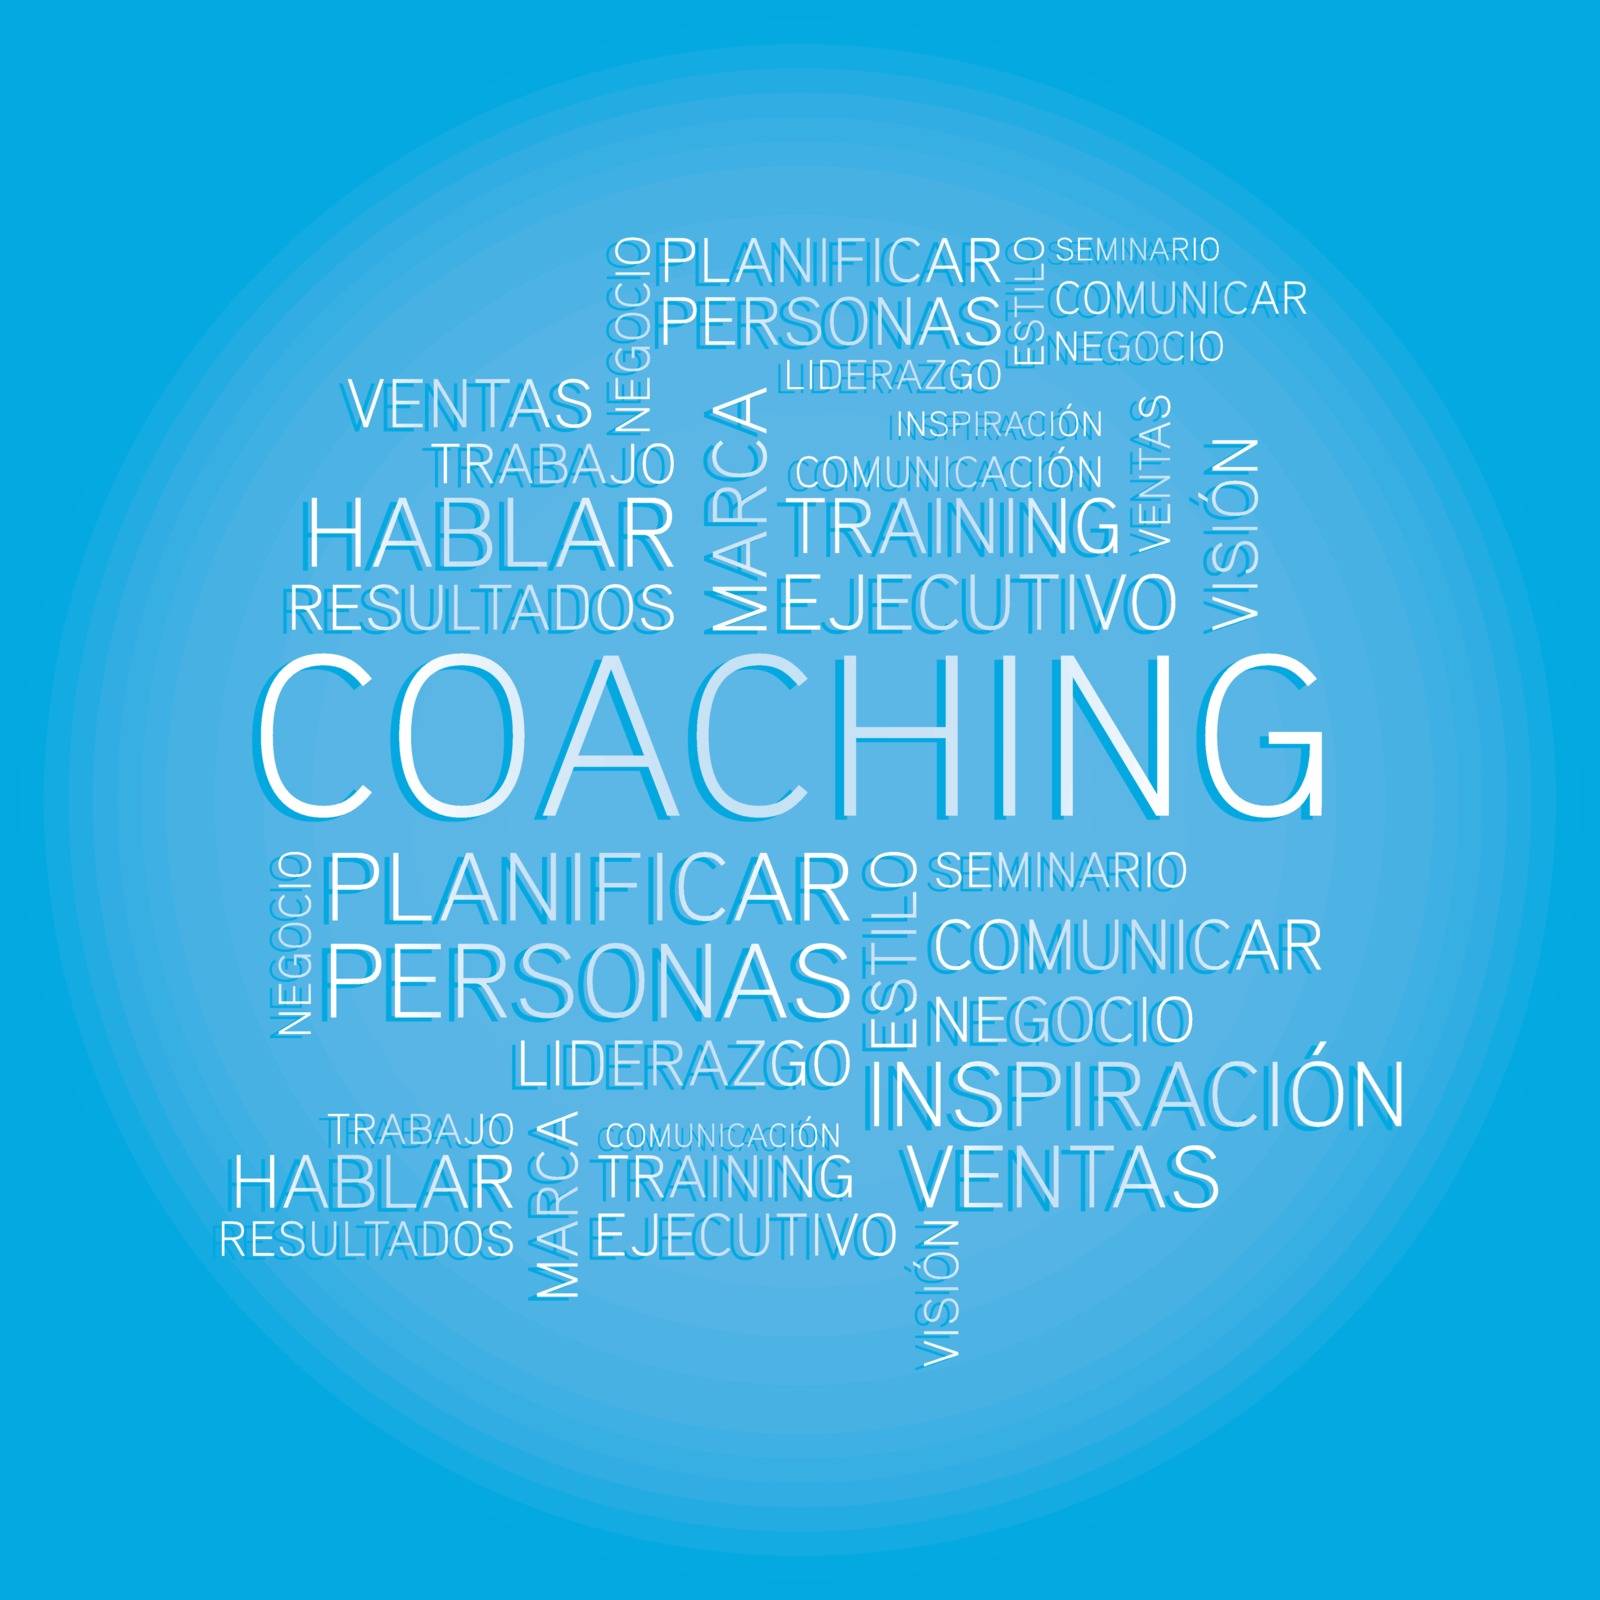 Coaching concept related spanish words in tag by alvaroc